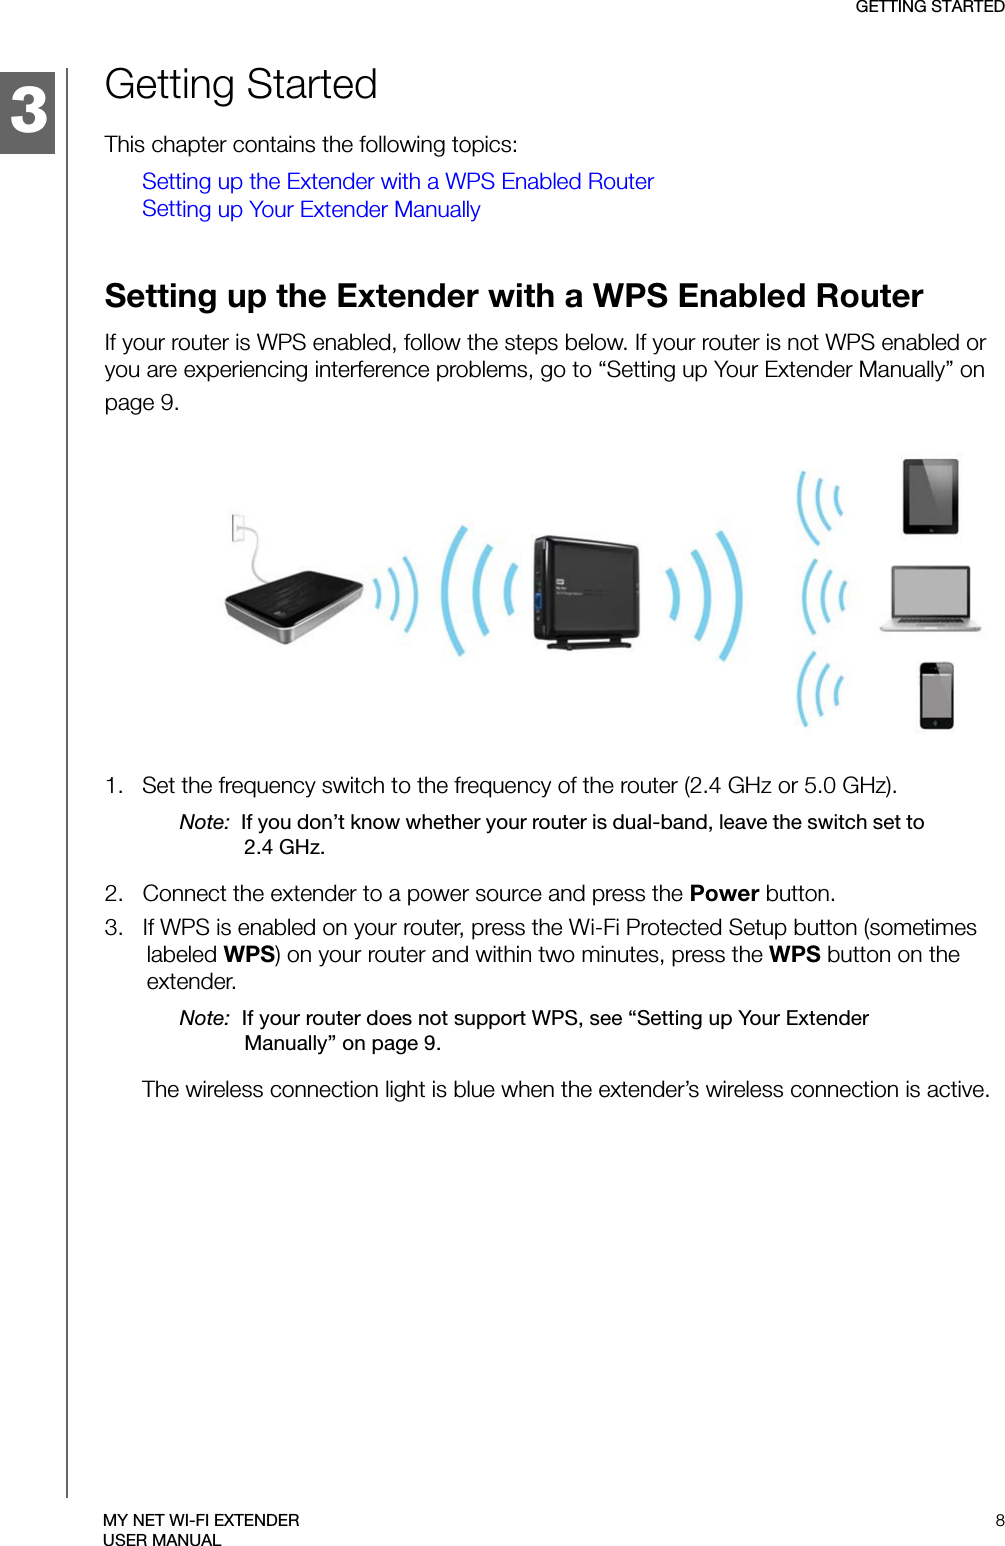 3GETTING STARTED8MY NET WI-FI EXTENDERUSER MANUALGetting StartedThis chapter contains the following topics:Setting up the Extender with a WPS Enabled RouterSetting up Your Extender ManuallySetting up the Extender with a WPS Enabled RouterIf your router is WPS enabled, follow the steps below. If your router is not WPS enabled or you are experiencing interference problems, go to “Setting up Your Extender Manually” on page 9.1.   Set the frequency switch to the frequency of the router (2.4 GHz or 5.0 GHz). Note:  If you don’t know whether your router is dual-band, leave the switch set to 2.4 GHz.2.   Connect the extender to a power source and press the Power button.3.   If WPS is enabled on your router, press the Wi-Fi Protected Setup button (sometimes labeled WPS) on your router and within two minutes, press the WPS button on the extender.Note:  If your router does not support WPS, see “Setting up Your Extender Manually” on page 9.The wireless connection light is blue when the extender’s wireless connection is active.1